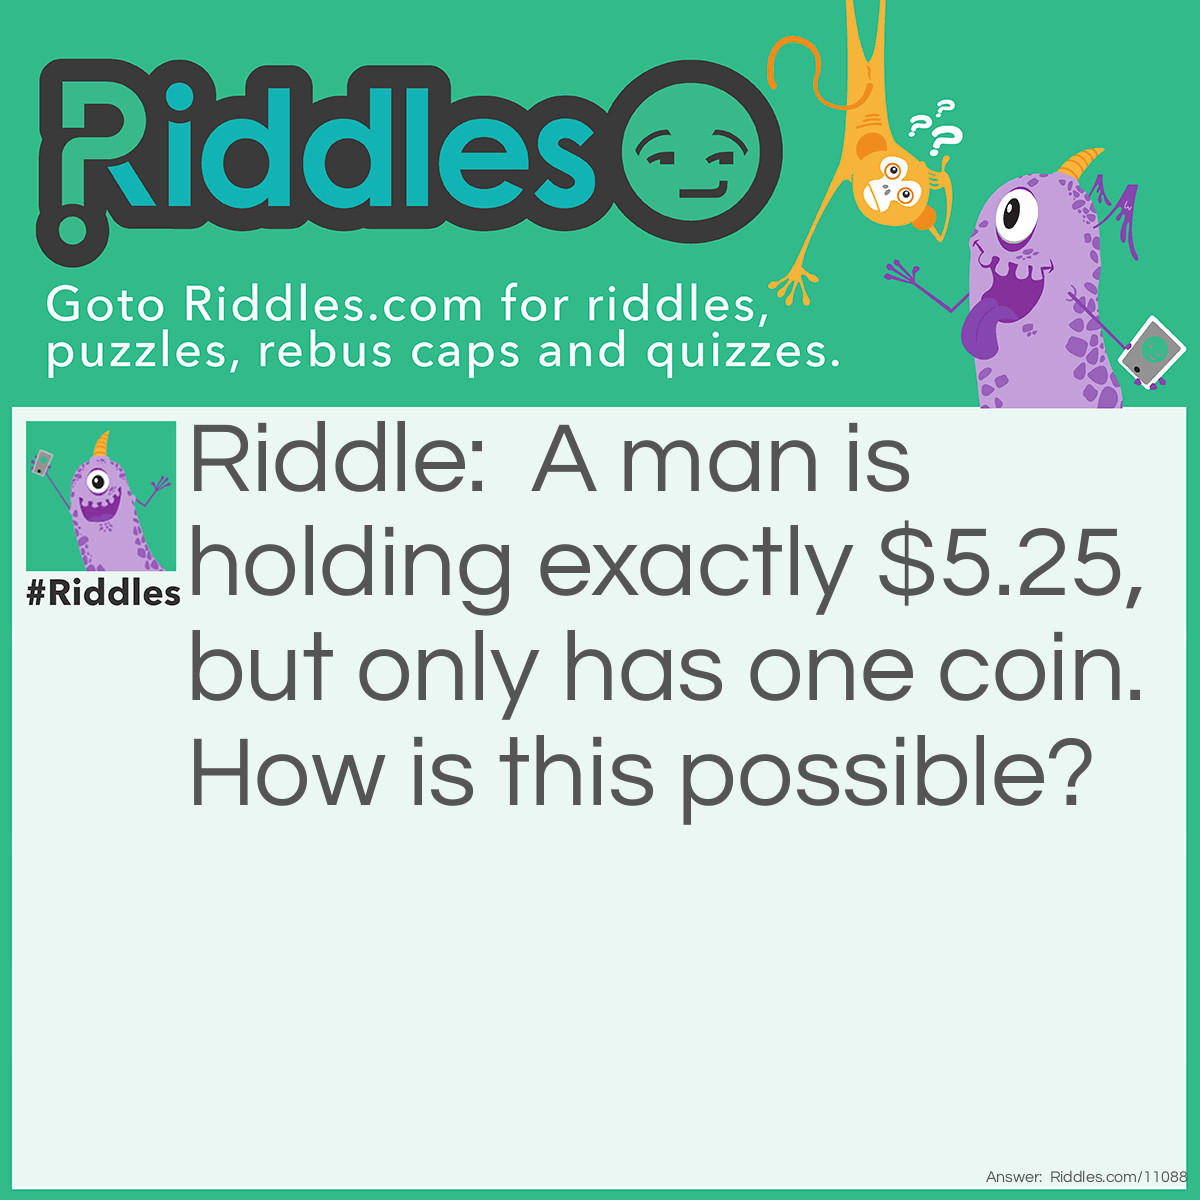 Riddle: A man is holding exactly $5.25, but only has one coin. How is this possible? Answer: He has a quarter and a $5 bill.